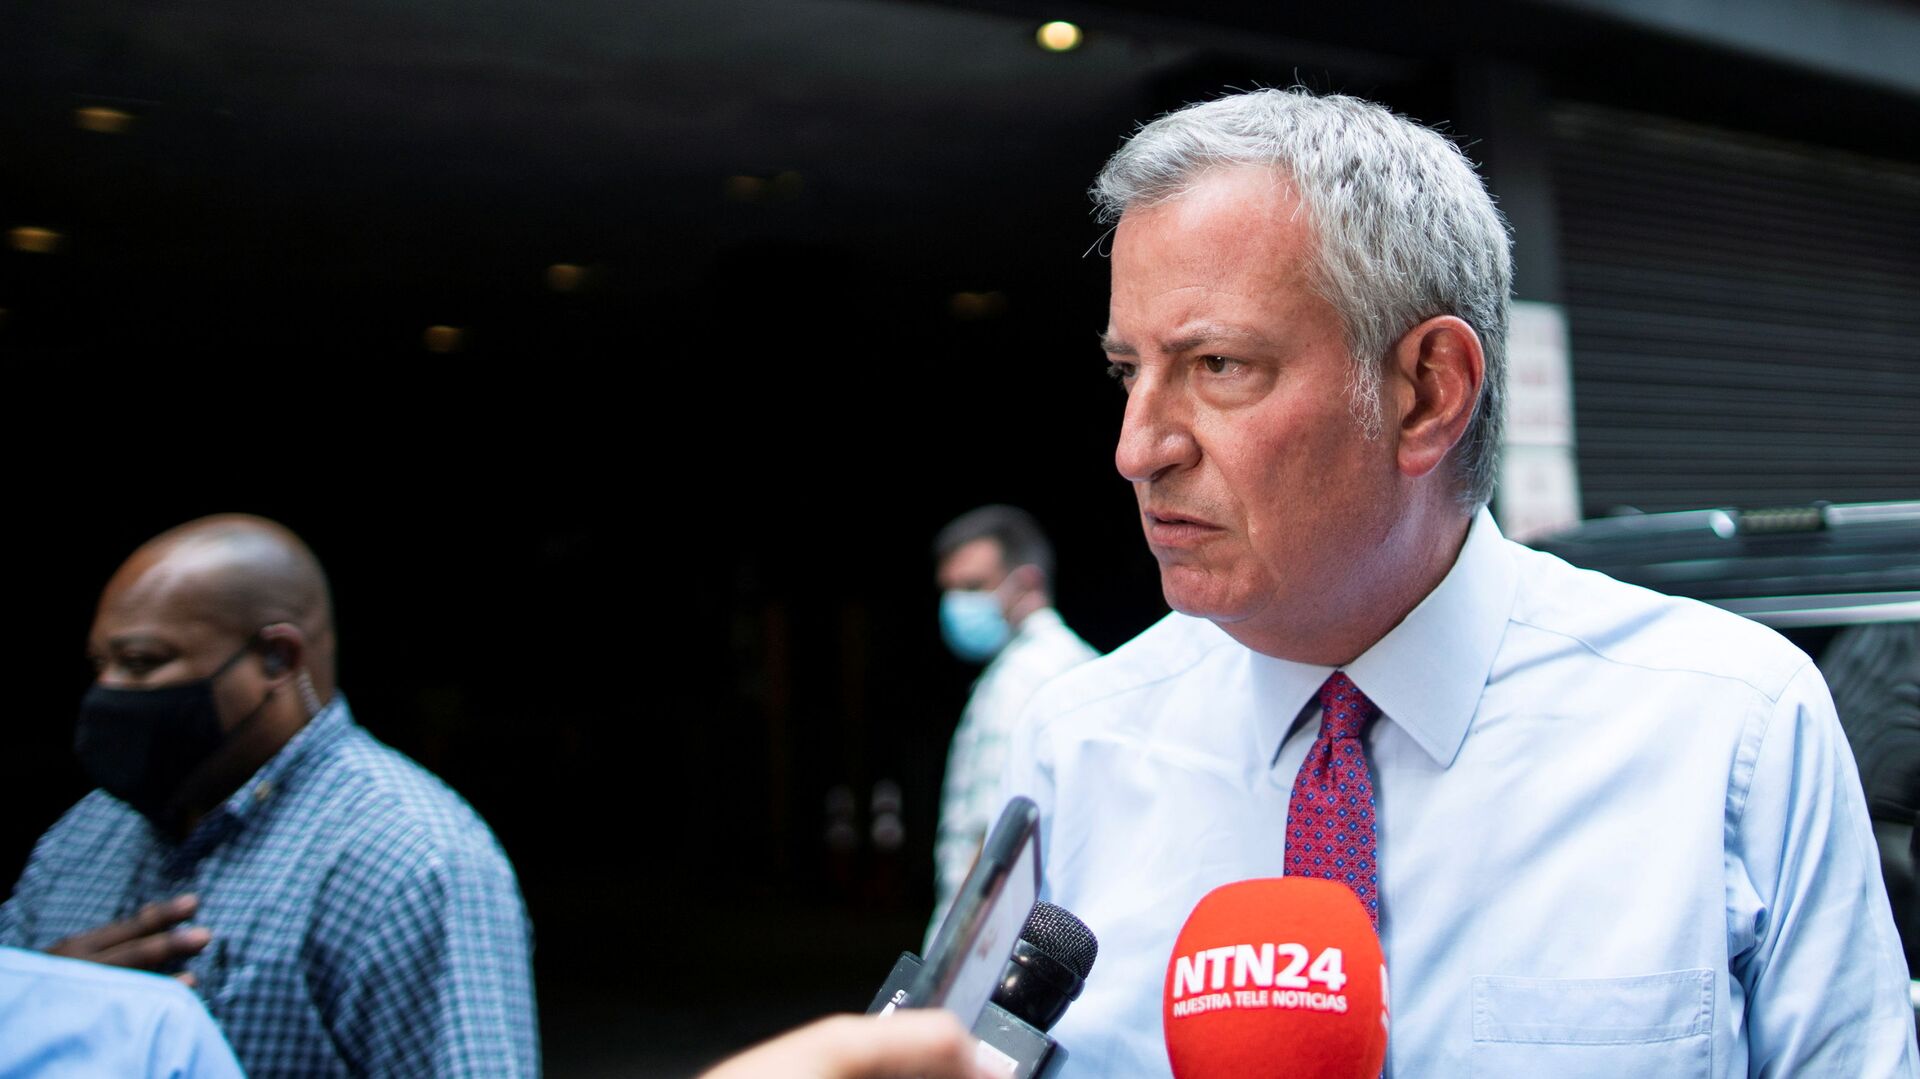 New York City Mayor Bill de Blasio gives his remarks to the media regarding a probe that found New York Governor Andrew Cuomo sexually harassed multiple women, in New York City, New York, U.S., August 3, 2021. - Sputnik International, 1920, 03.08.2021